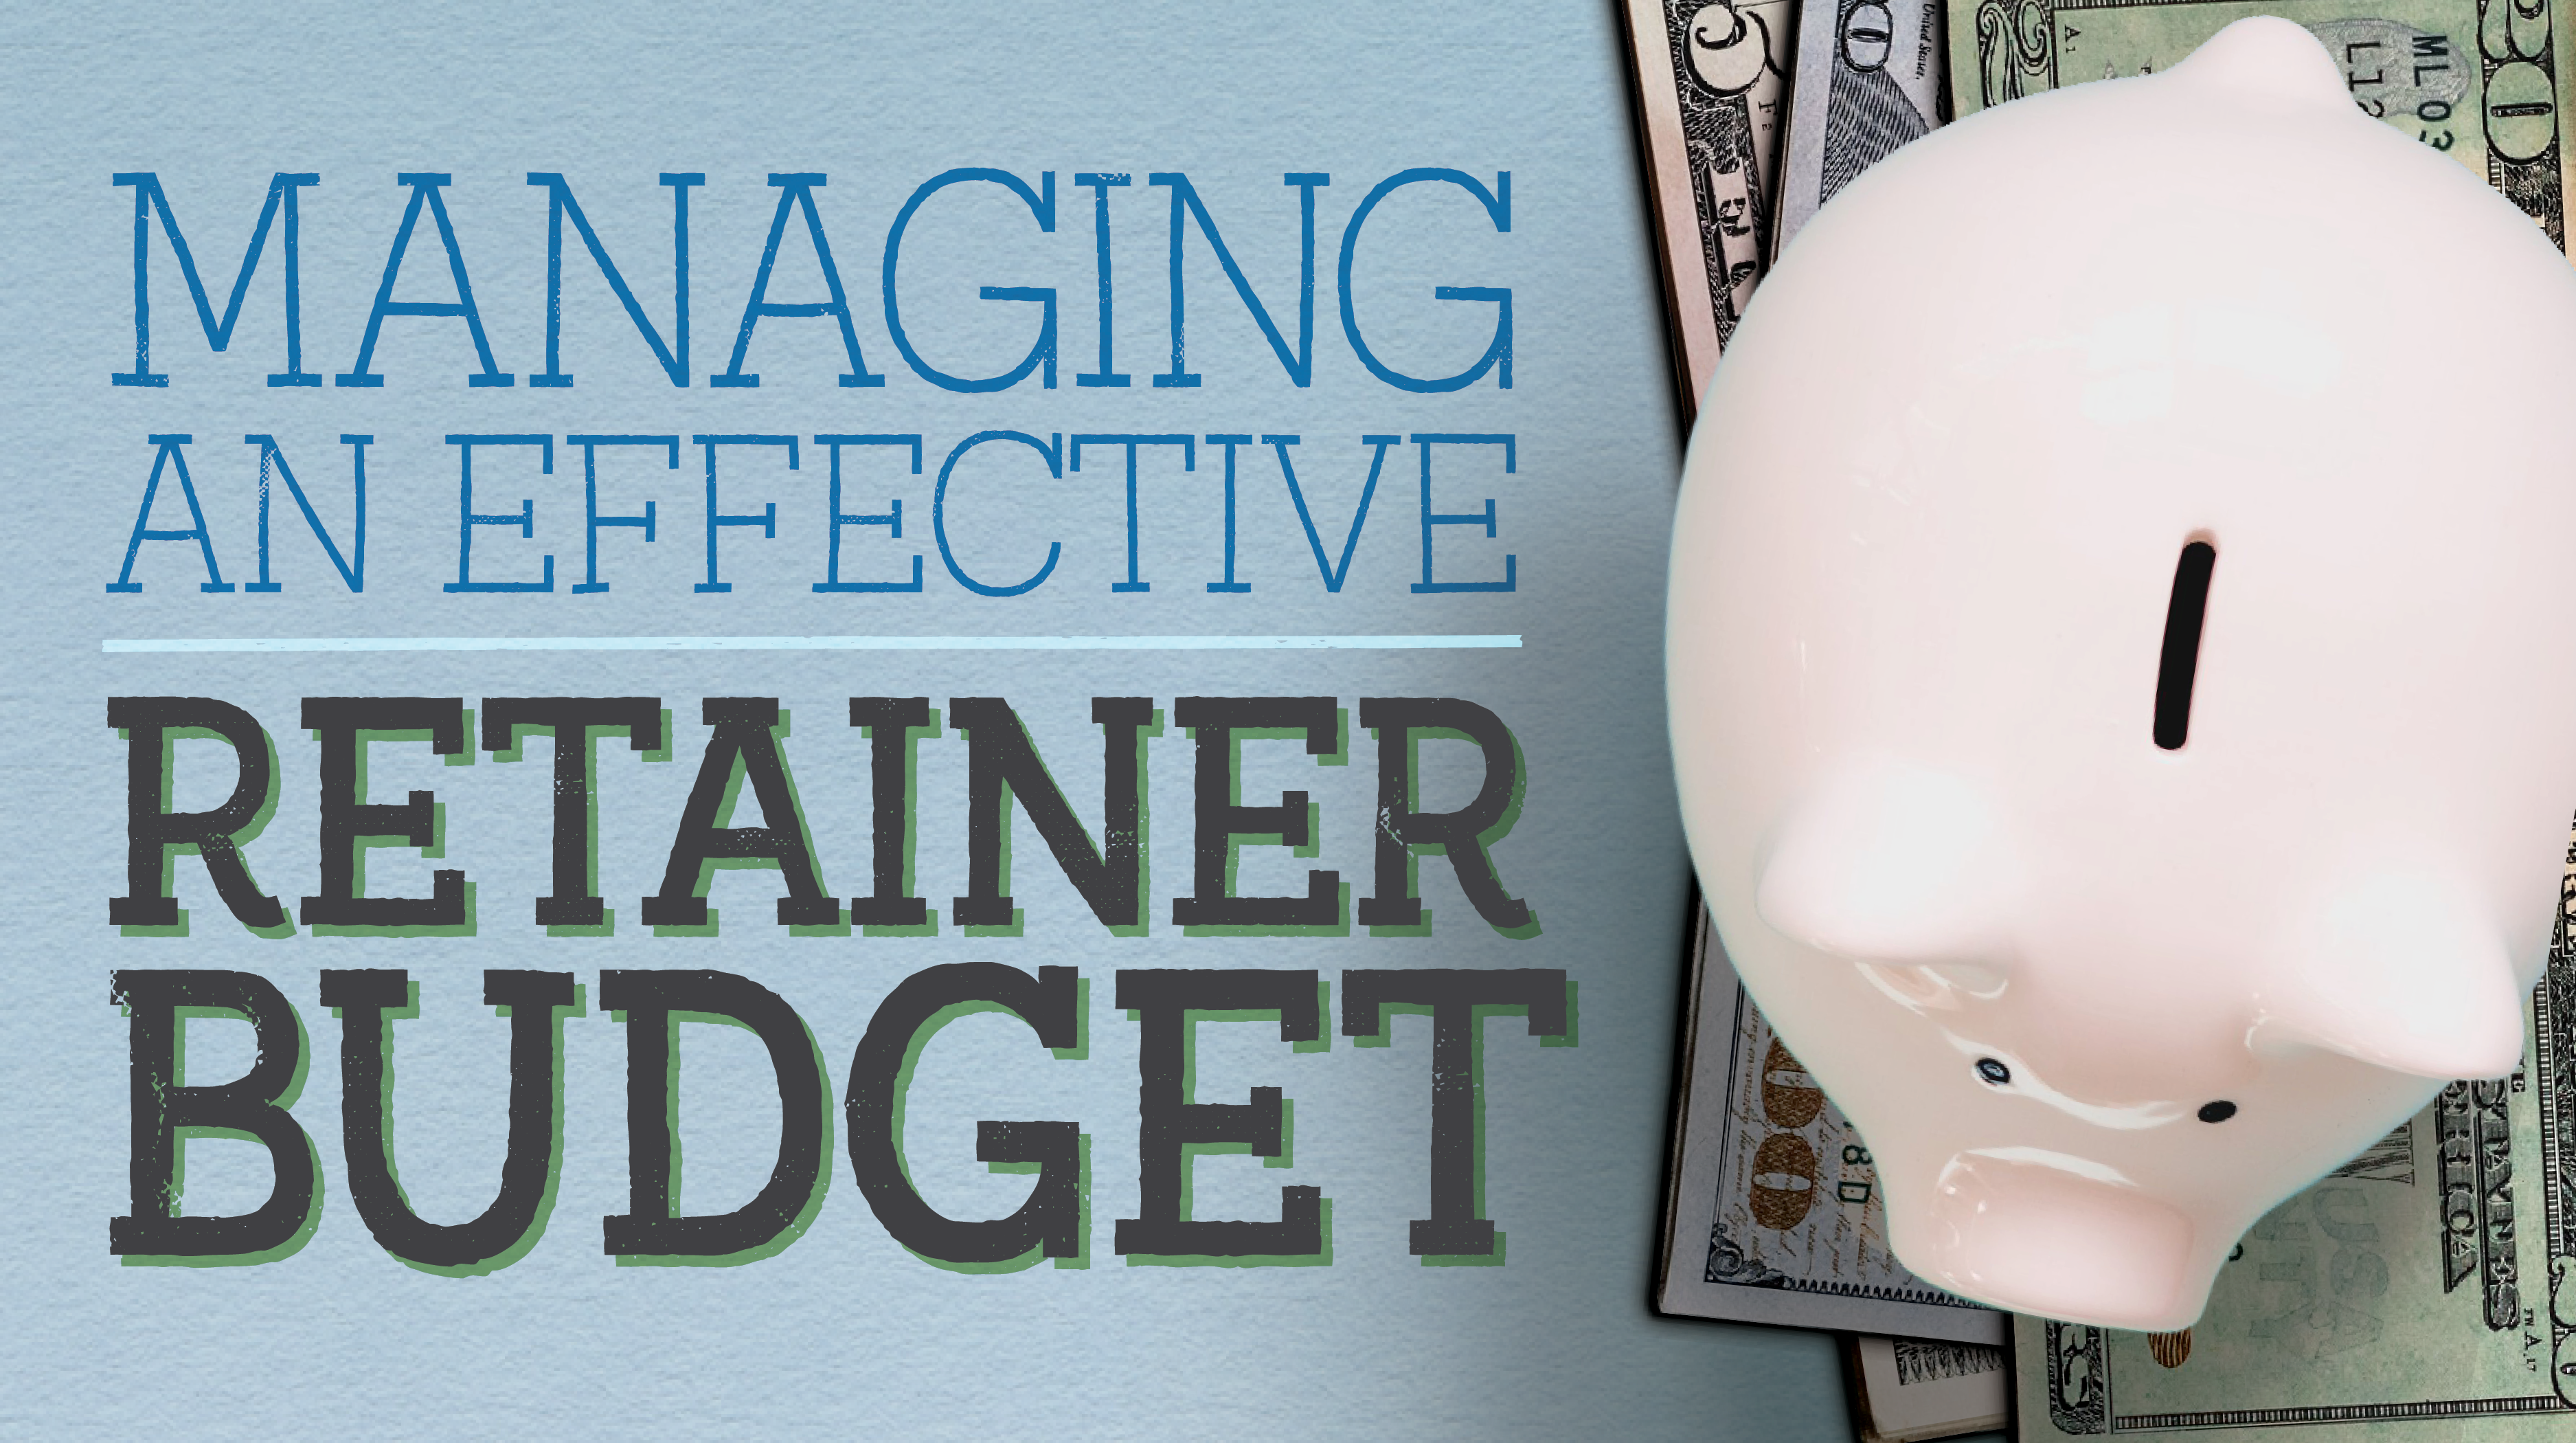 Managing an Effective Retainer Budget